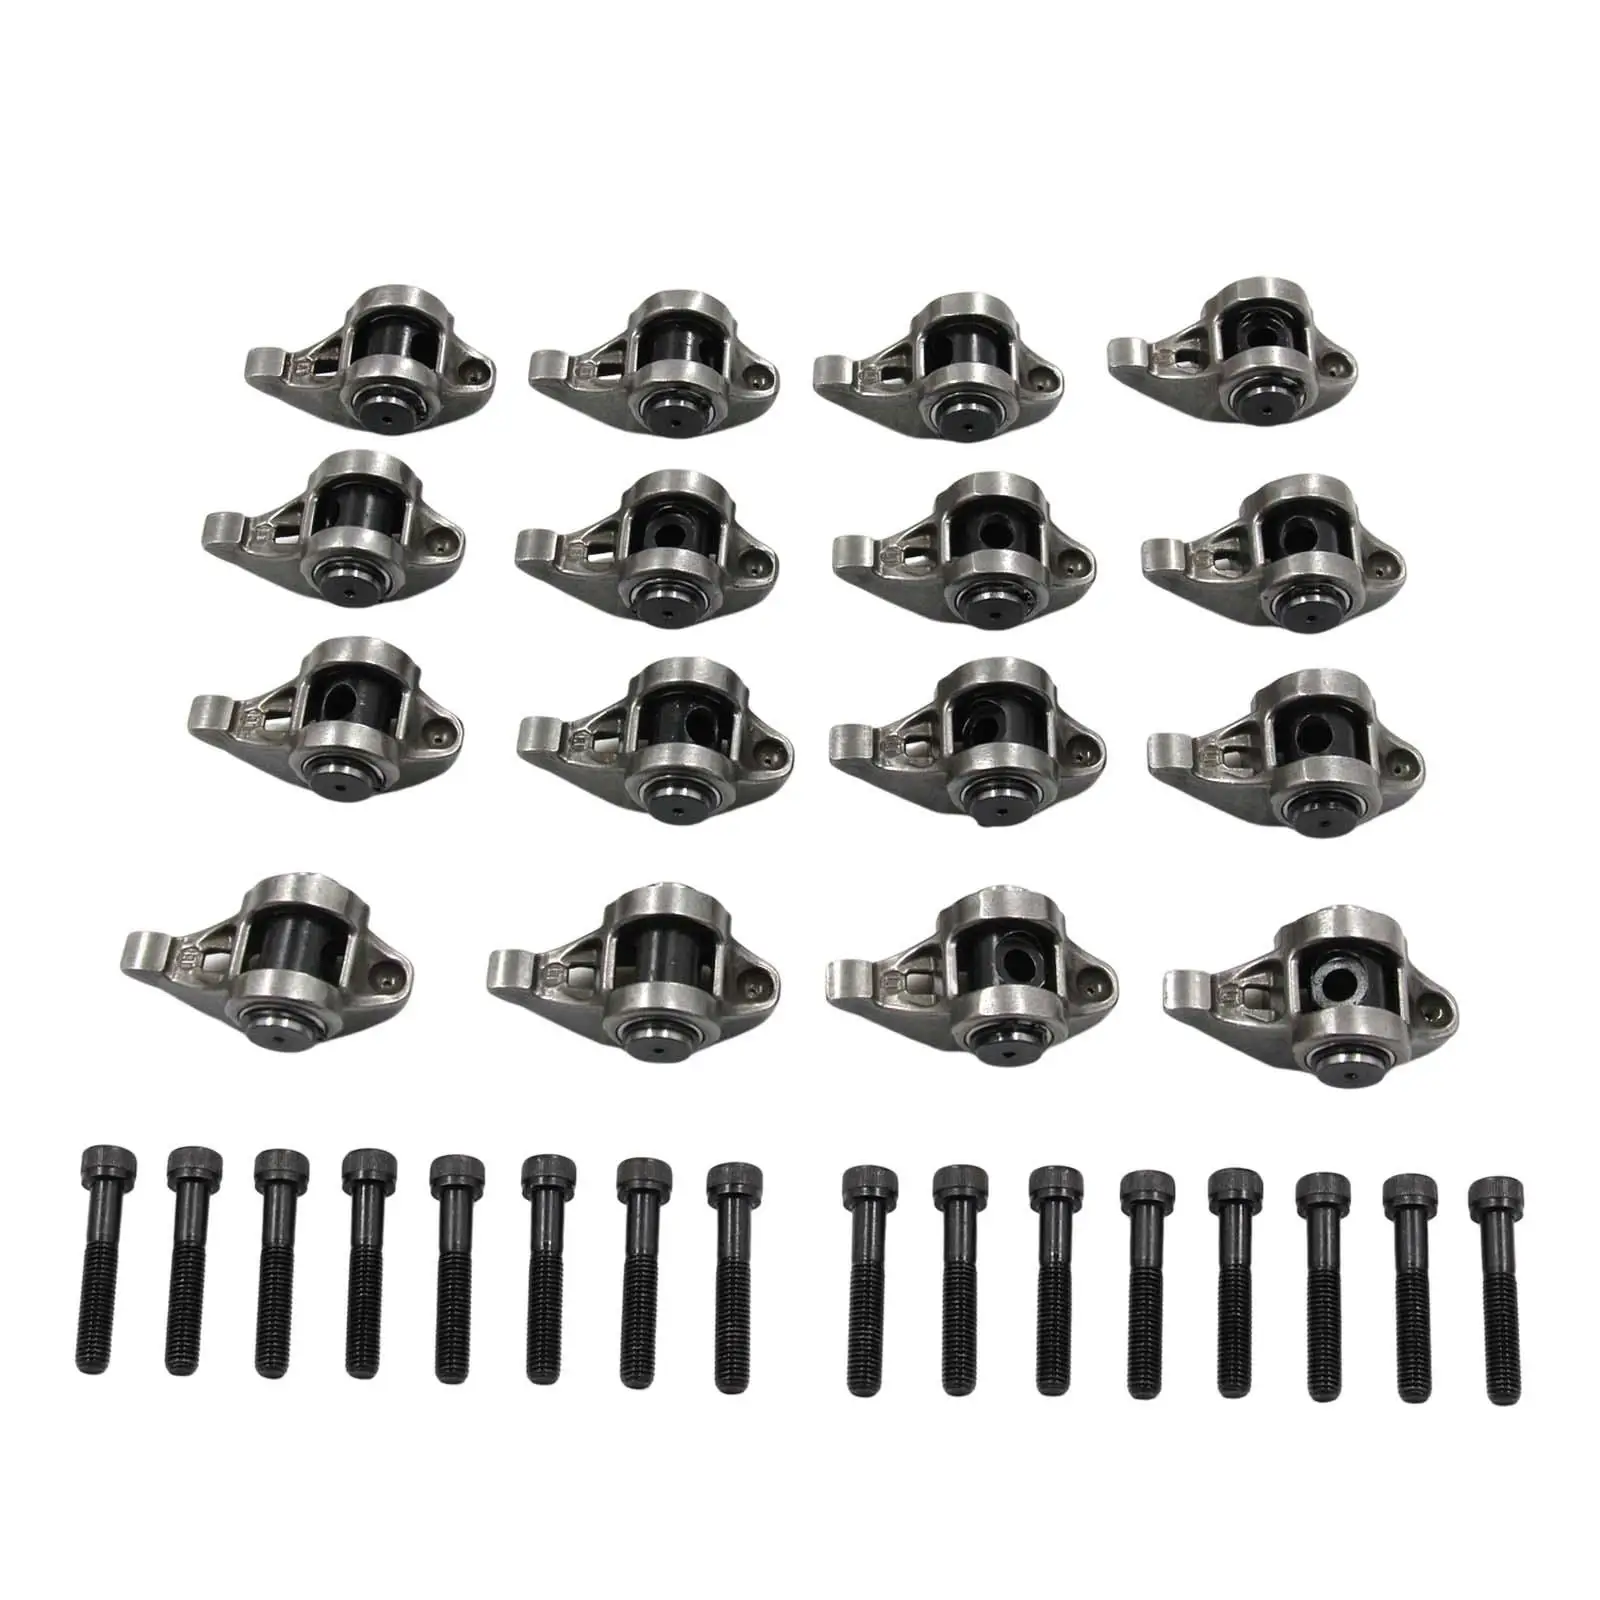 16 Pieces Rocker Arms and Bolts with Trunion Kit 10214664 Replace Parts Steel for Chevrolet LS1 LS2 LS3 LS6 Lq4 Lq9 LM7 LM4